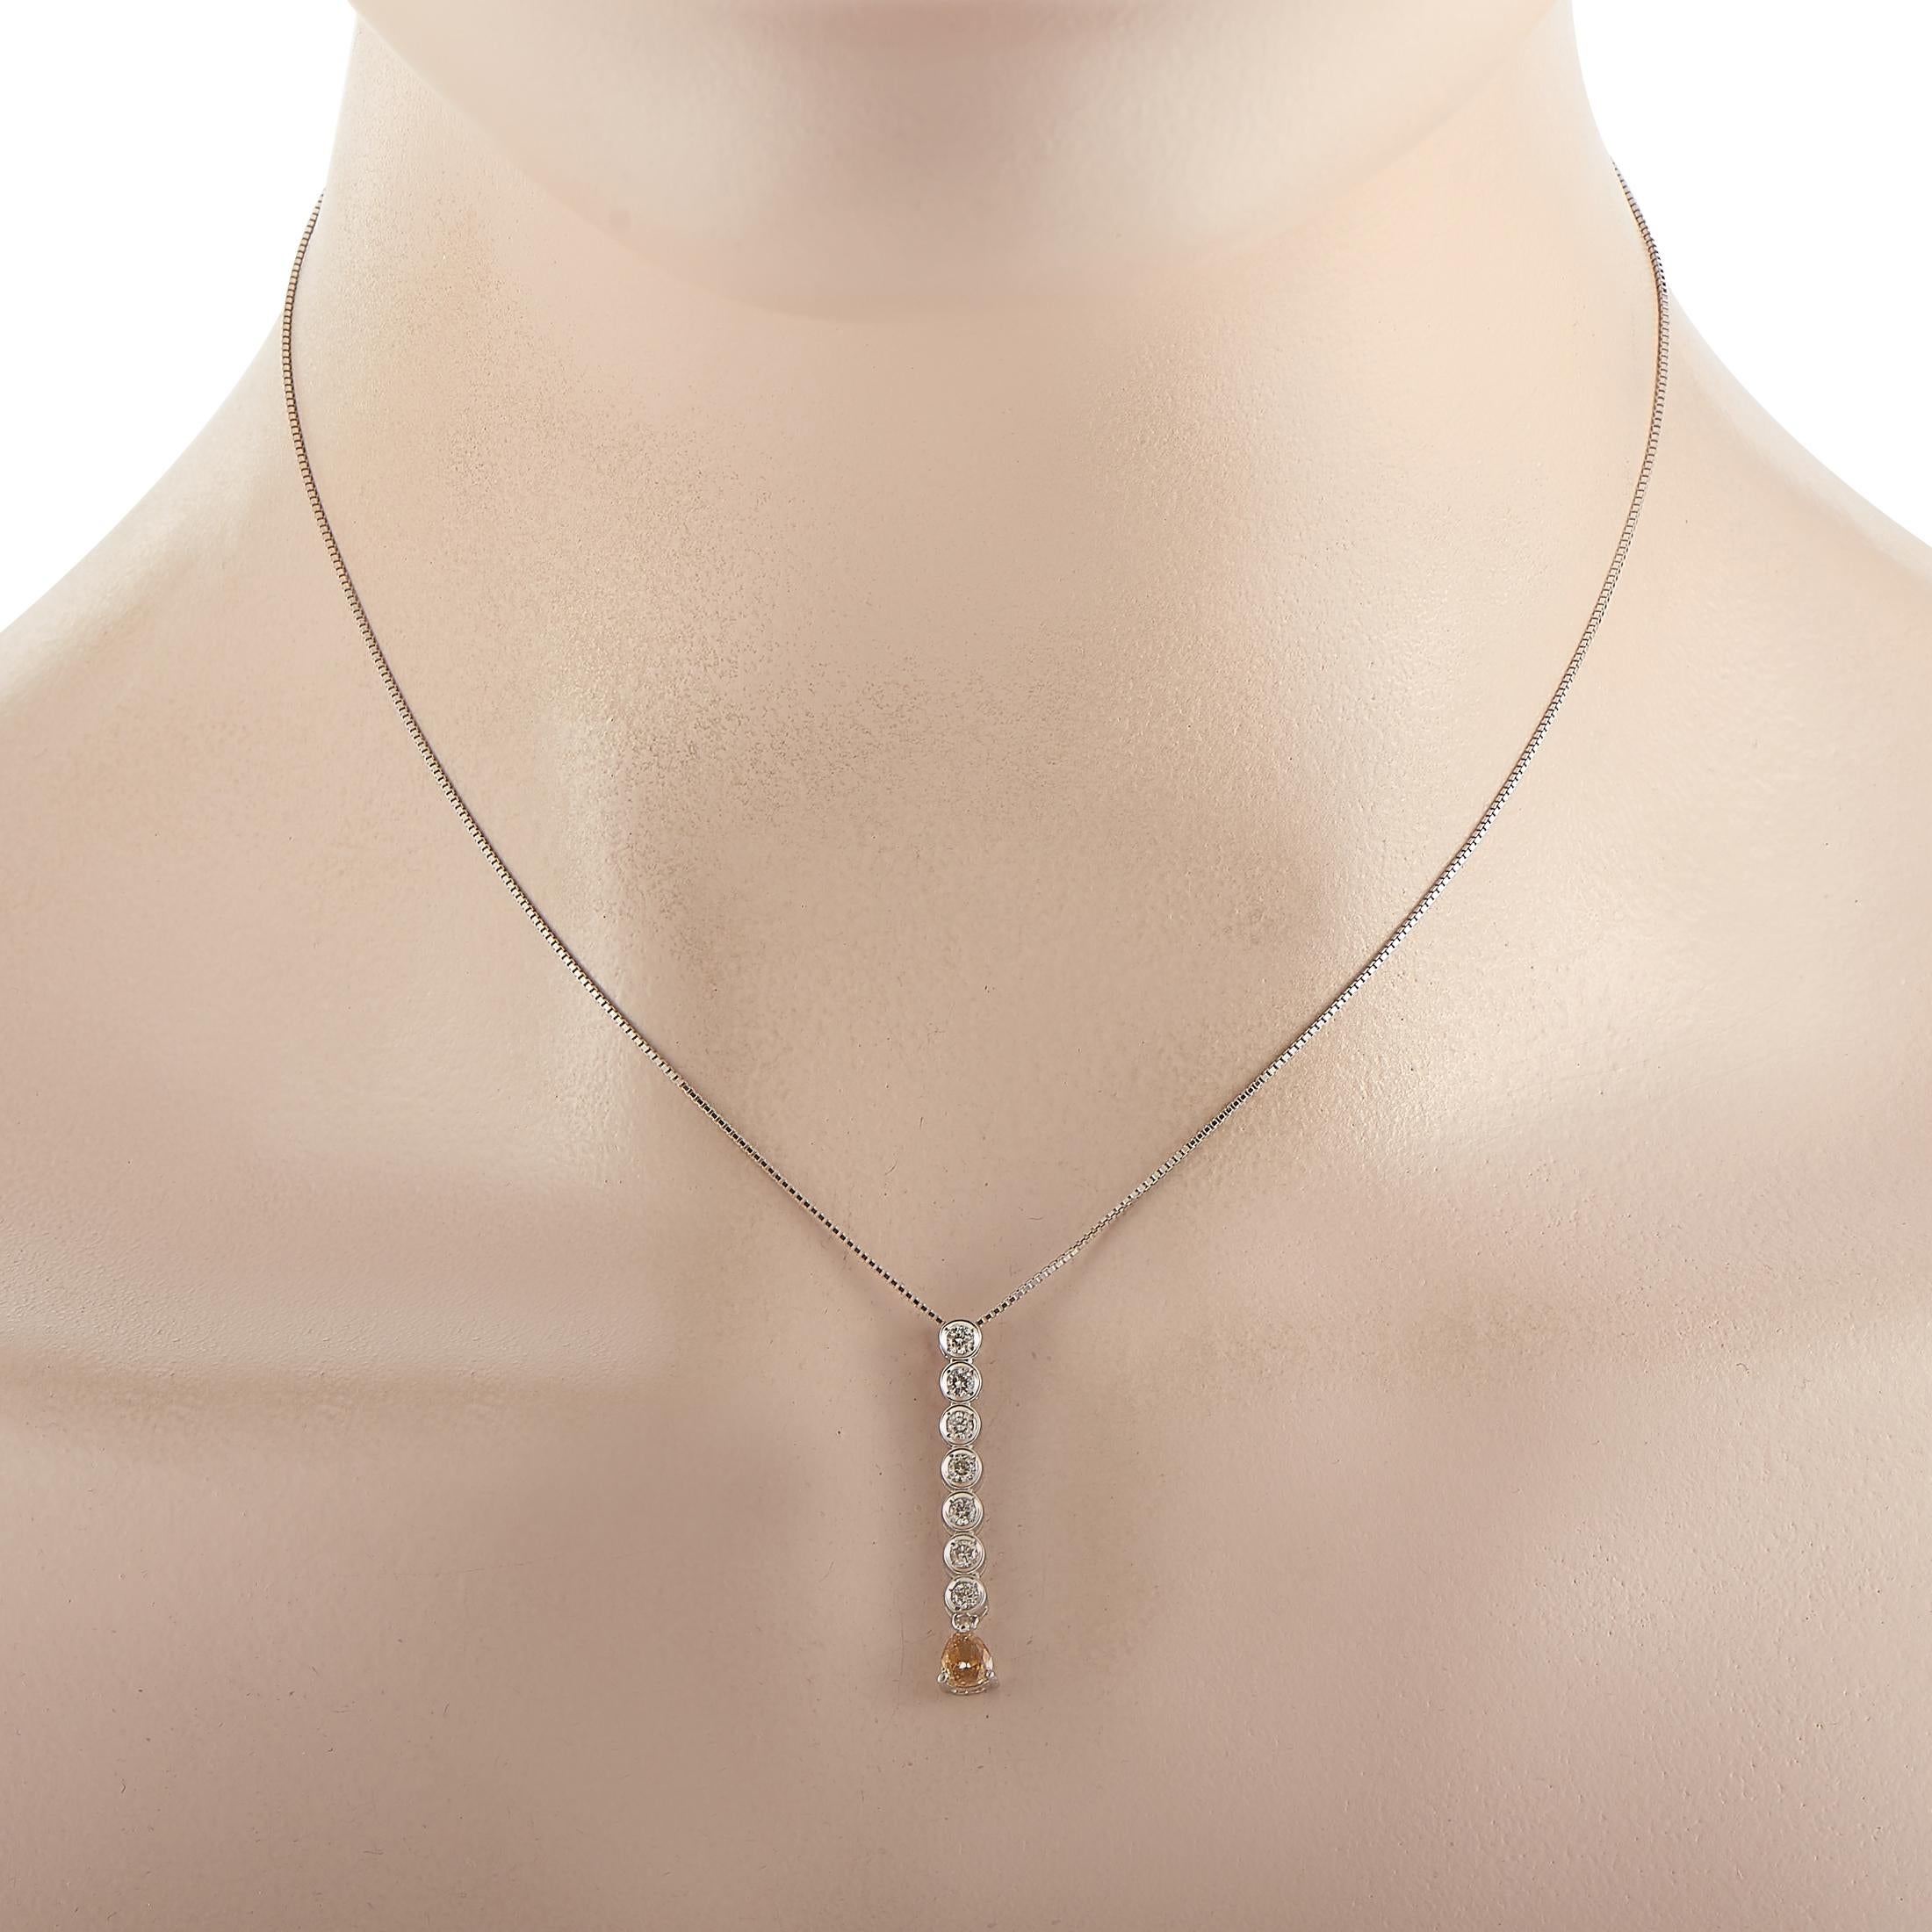 This sleek pendant necklace boasts a contemporary sense of style. On the 18K White Gold pendant - which measures 1.15” long and .15” wide - you’ll find a series of bezel-set white diamonds with a total weight of 0.28 carats. A 0.27 carat brown